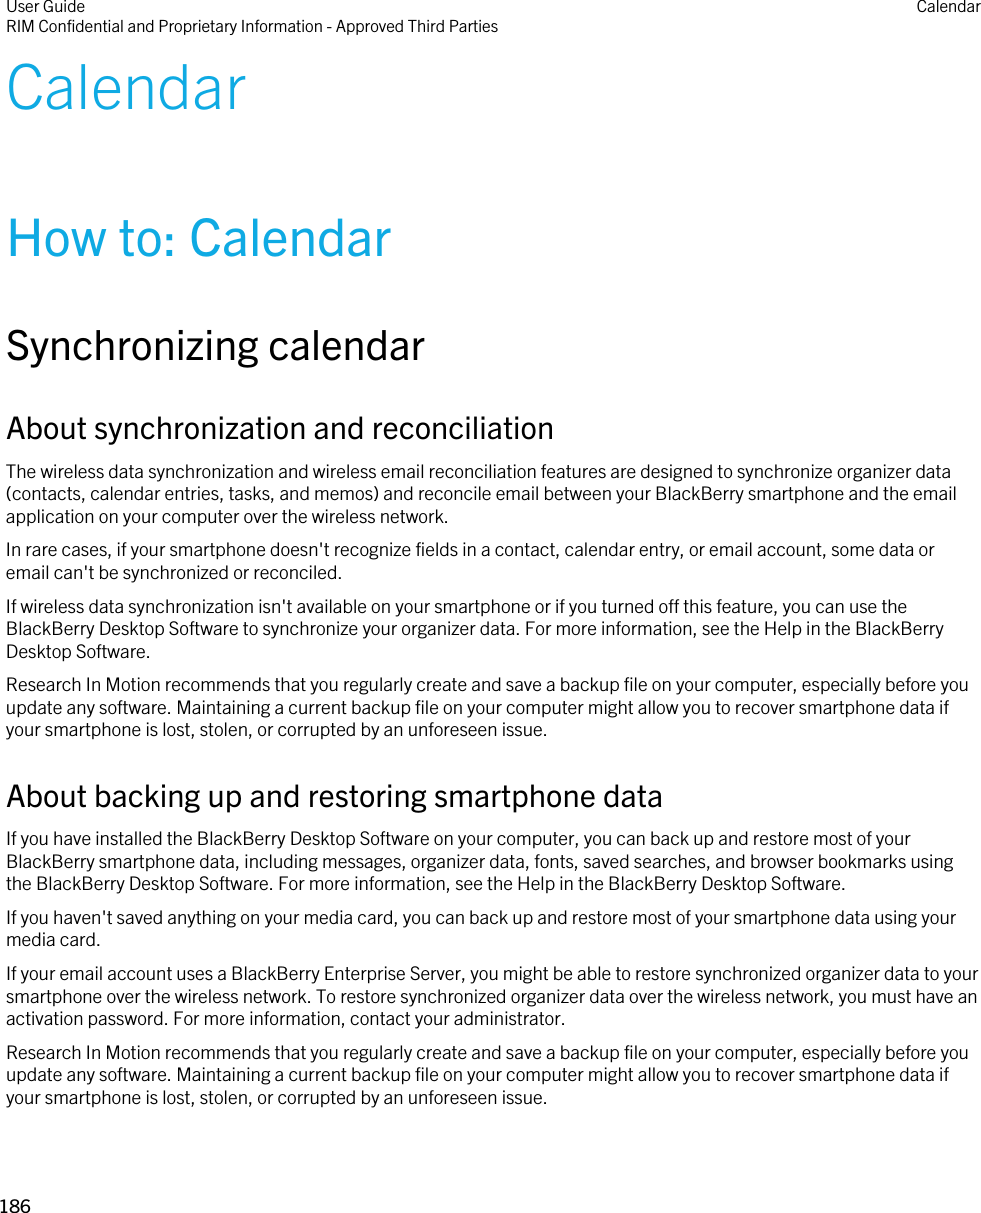 CalendarHow to: CalendarSynchronizing calendarAbout synchronization and reconciliationThe wireless data synchronization and wireless email reconciliation features are designed to synchronize organizer data (contacts, calendar entries, tasks, and memos) and reconcile email between your BlackBerry smartphone and the email application on your computer over the wireless network.In rare cases, if your smartphone doesn&apos;t recognize fields in a contact, calendar entry, or email account, some data or email can&apos;t be synchronized or reconciled.If wireless data synchronization isn&apos;t available on your smartphone or if you turned off this feature, you can use the BlackBerry Desktop Software to synchronize your organizer data. For more information, see the Help in the BlackBerry Desktop Software.Research In Motion recommends that you regularly create and save a backup file on your computer, especially before you update any software. Maintaining a current backup file on your computer might allow you to recover smartphone data if your smartphone is lost, stolen, or corrupted by an unforeseen issue.About backing up and restoring smartphone dataIf you have installed the BlackBerry Desktop Software on your computer, you can back up and restore most of your BlackBerry smartphone data, including messages, organizer data, fonts, saved searches, and browser bookmarks using the BlackBerry Desktop Software. For more information, see the Help in the BlackBerry Desktop Software.If you haven&apos;t saved anything on your media card, you can back up and restore most of your smartphone data using your media card.If your email account uses a BlackBerry Enterprise Server, you might be able to restore synchronized organizer data to your smartphone over the wireless network. To restore synchronized organizer data over the wireless network, you must have an activation password. For more information, contact your administrator.Research In Motion recommends that you regularly create and save a backup file on your computer, especially before you update any software. Maintaining a current backup file on your computer might allow you to recover smartphone data if your smartphone is lost, stolen, or corrupted by an unforeseen issue.User GuideRIM Confidential and Proprietary Information - Approved Third Parties Calendar186 